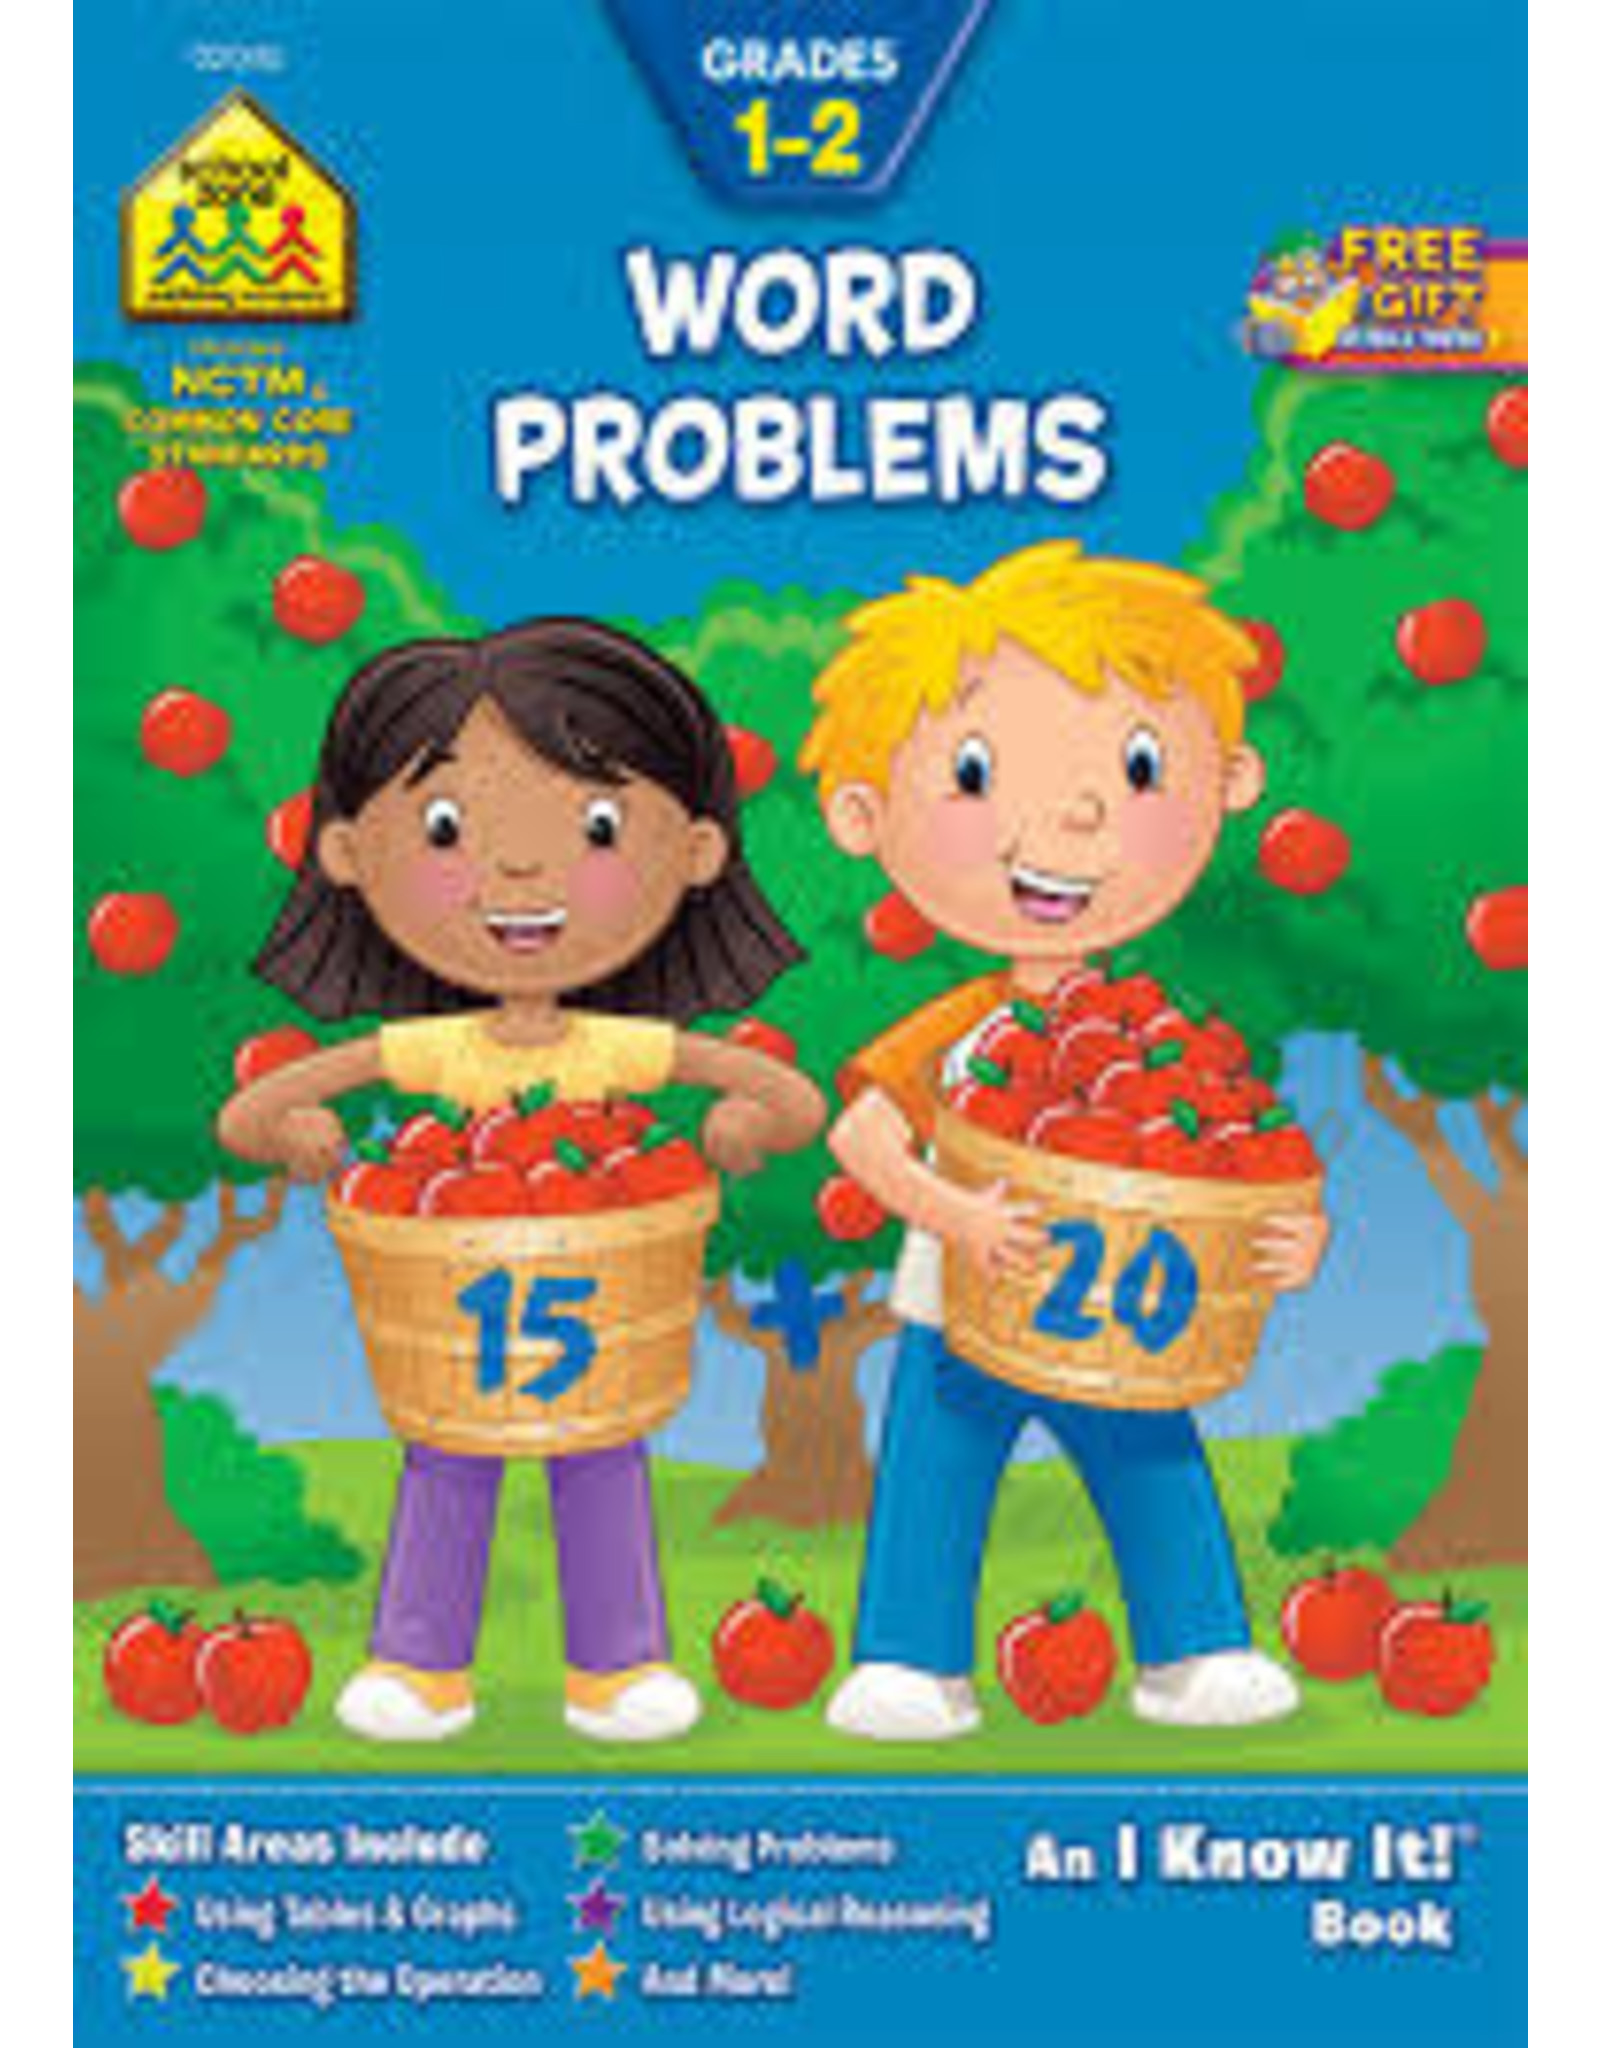 Word Problems 1-2